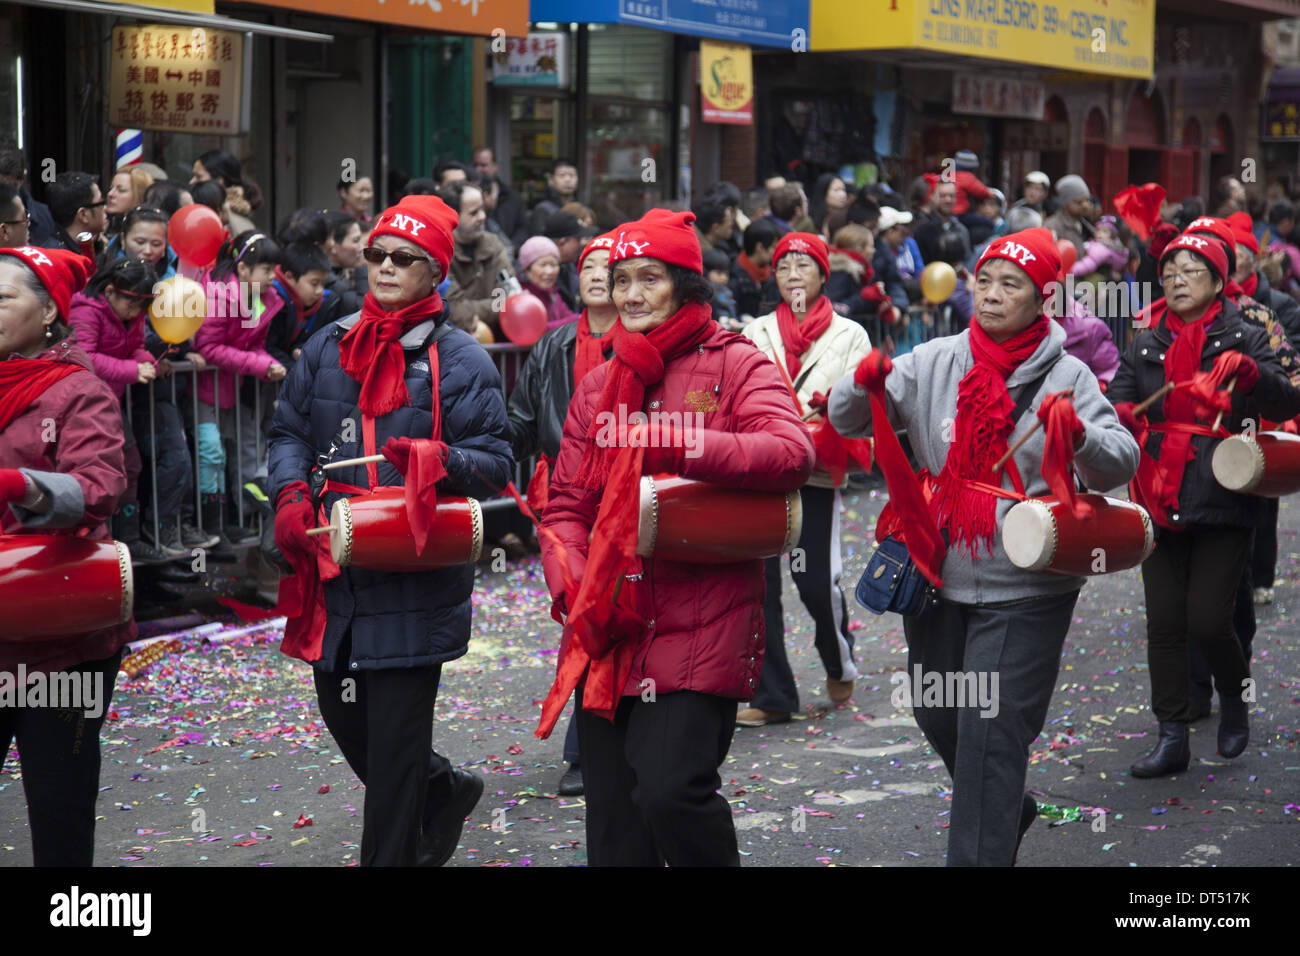 Older Chinese woman's group march in the Chinese New Year Parade in Chinatown, NYC. Stock Photo